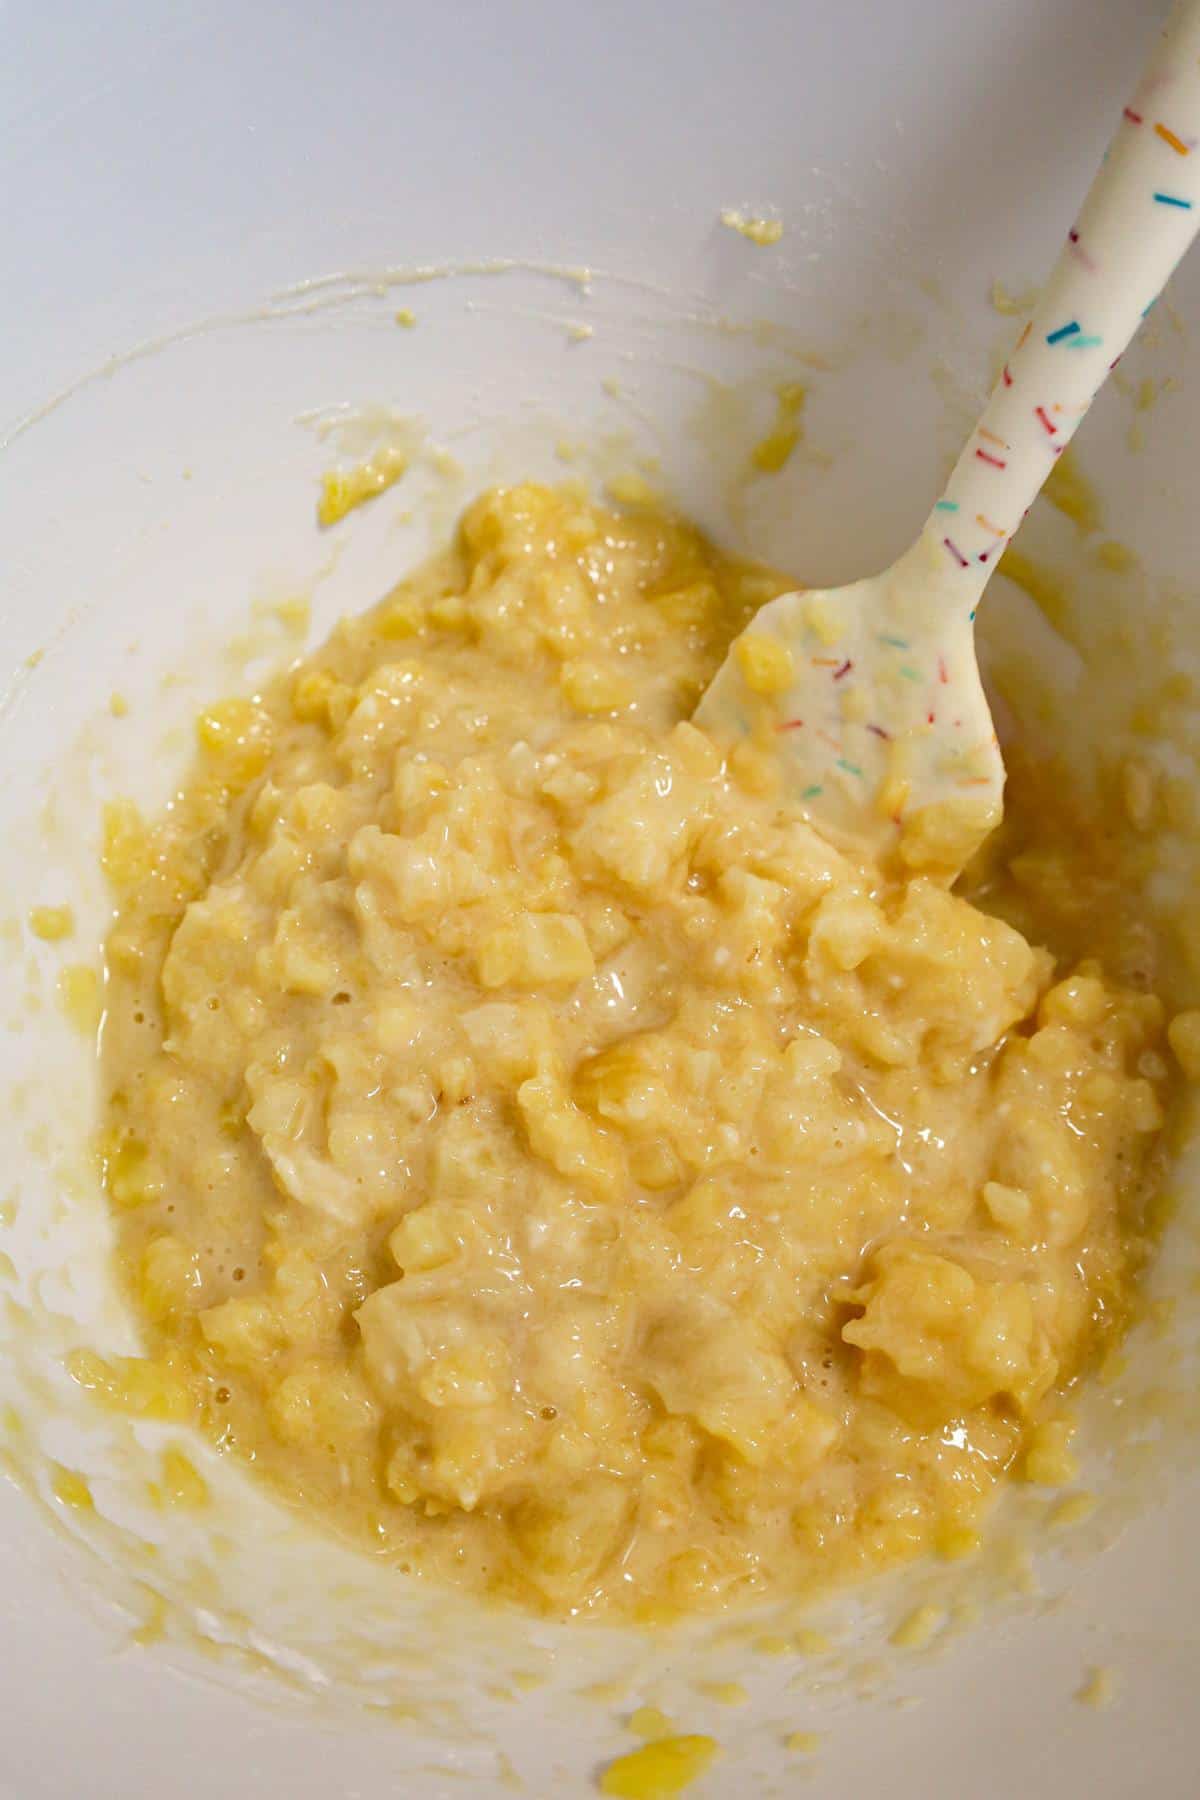 pineapple, sugar and flour mixture in a baking dish